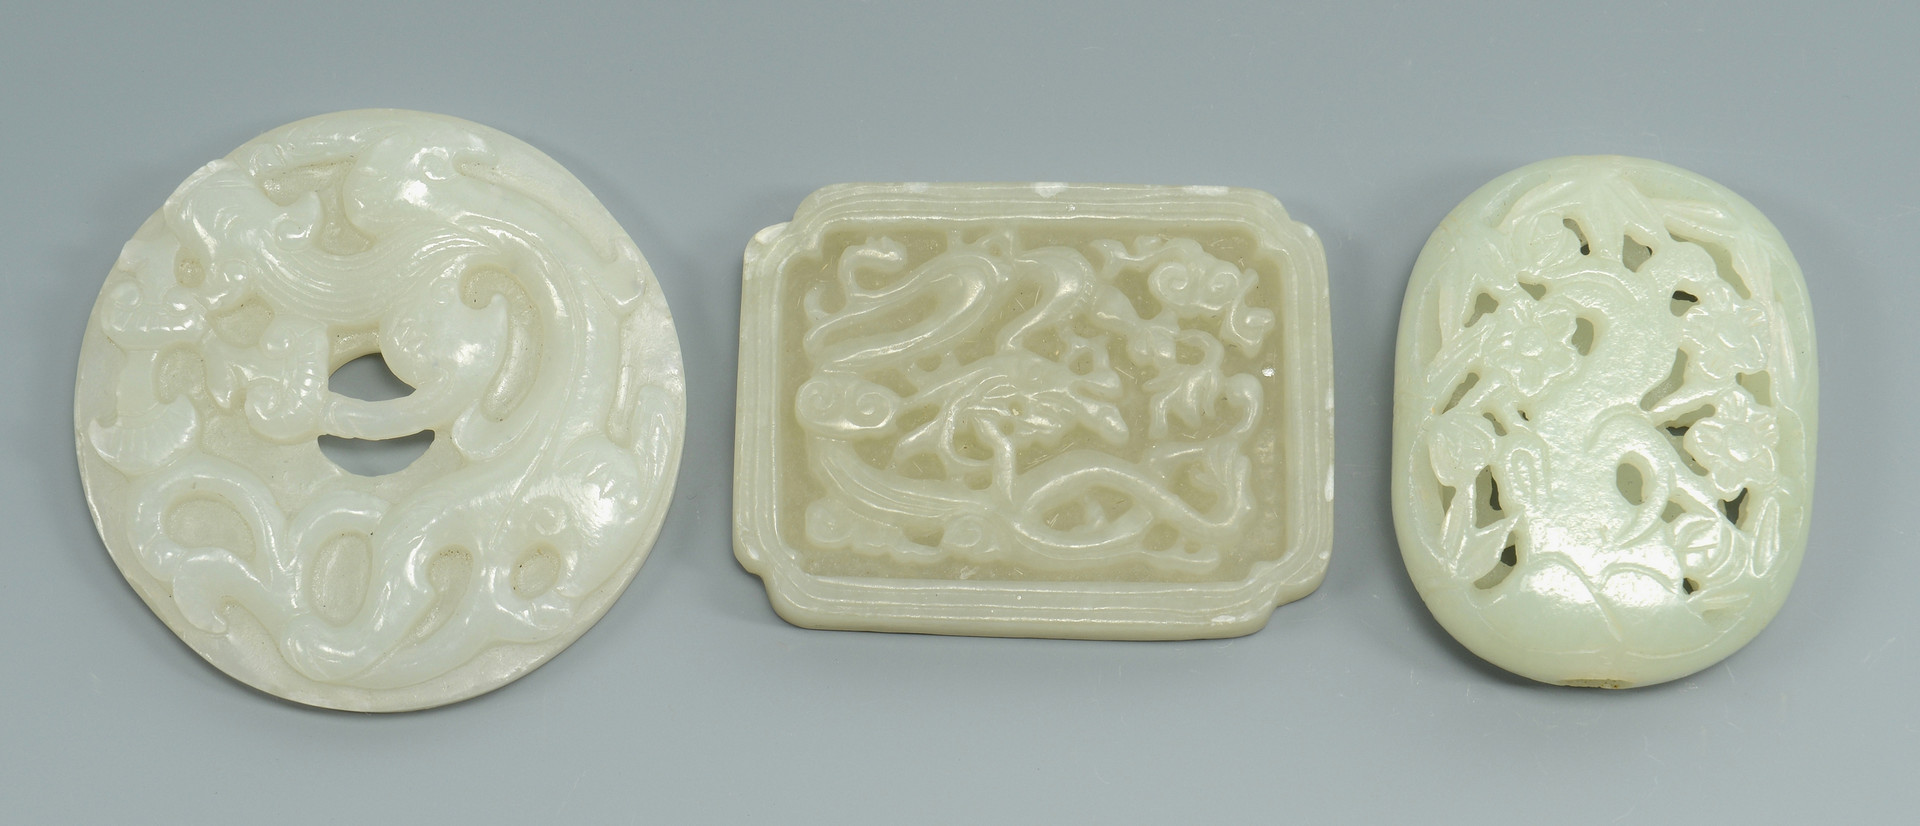 Lot 249: 3 Chinese Jade Carved Plaques